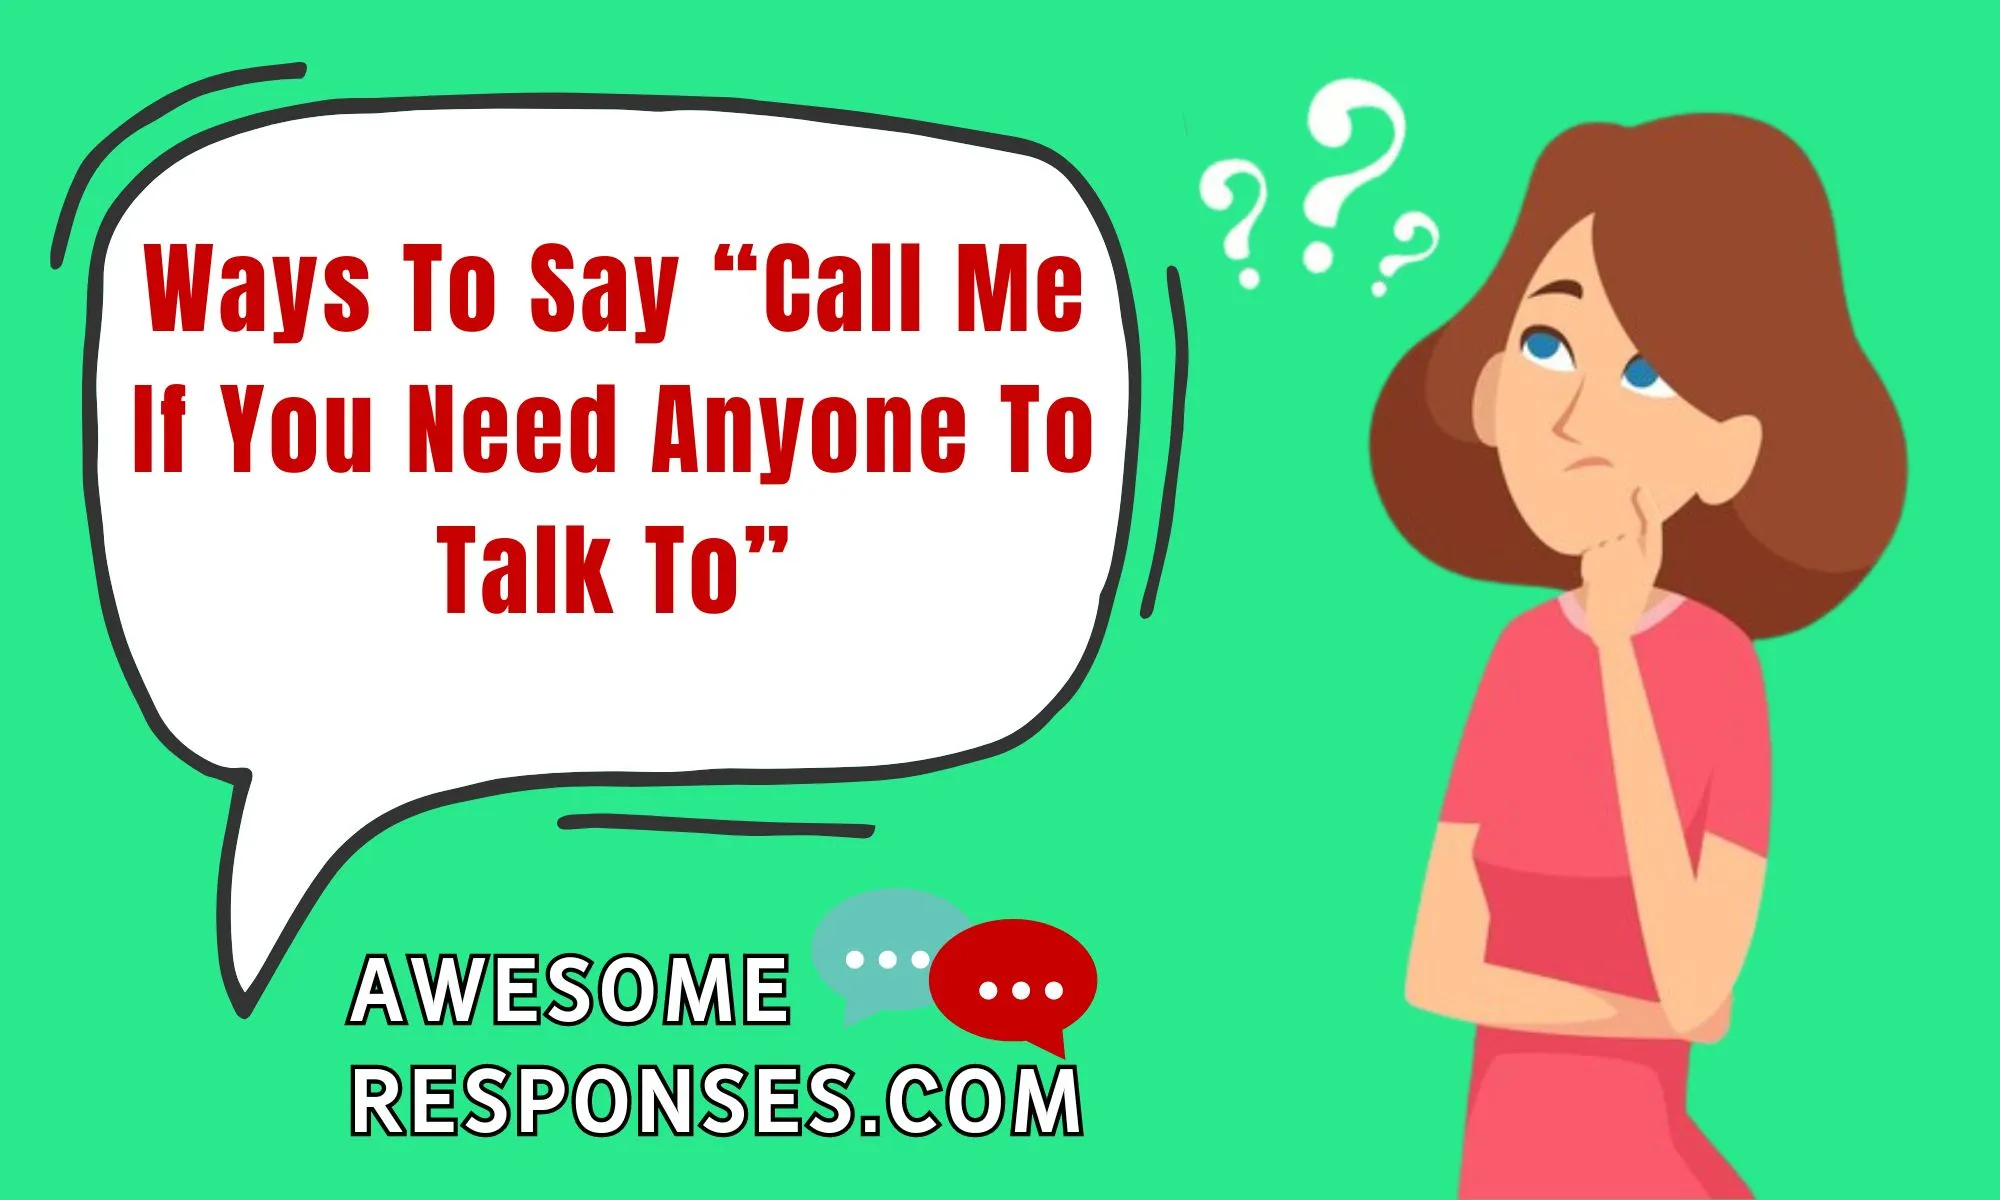 Ways To Say “Call Me If You Need Anyone To Talk To”